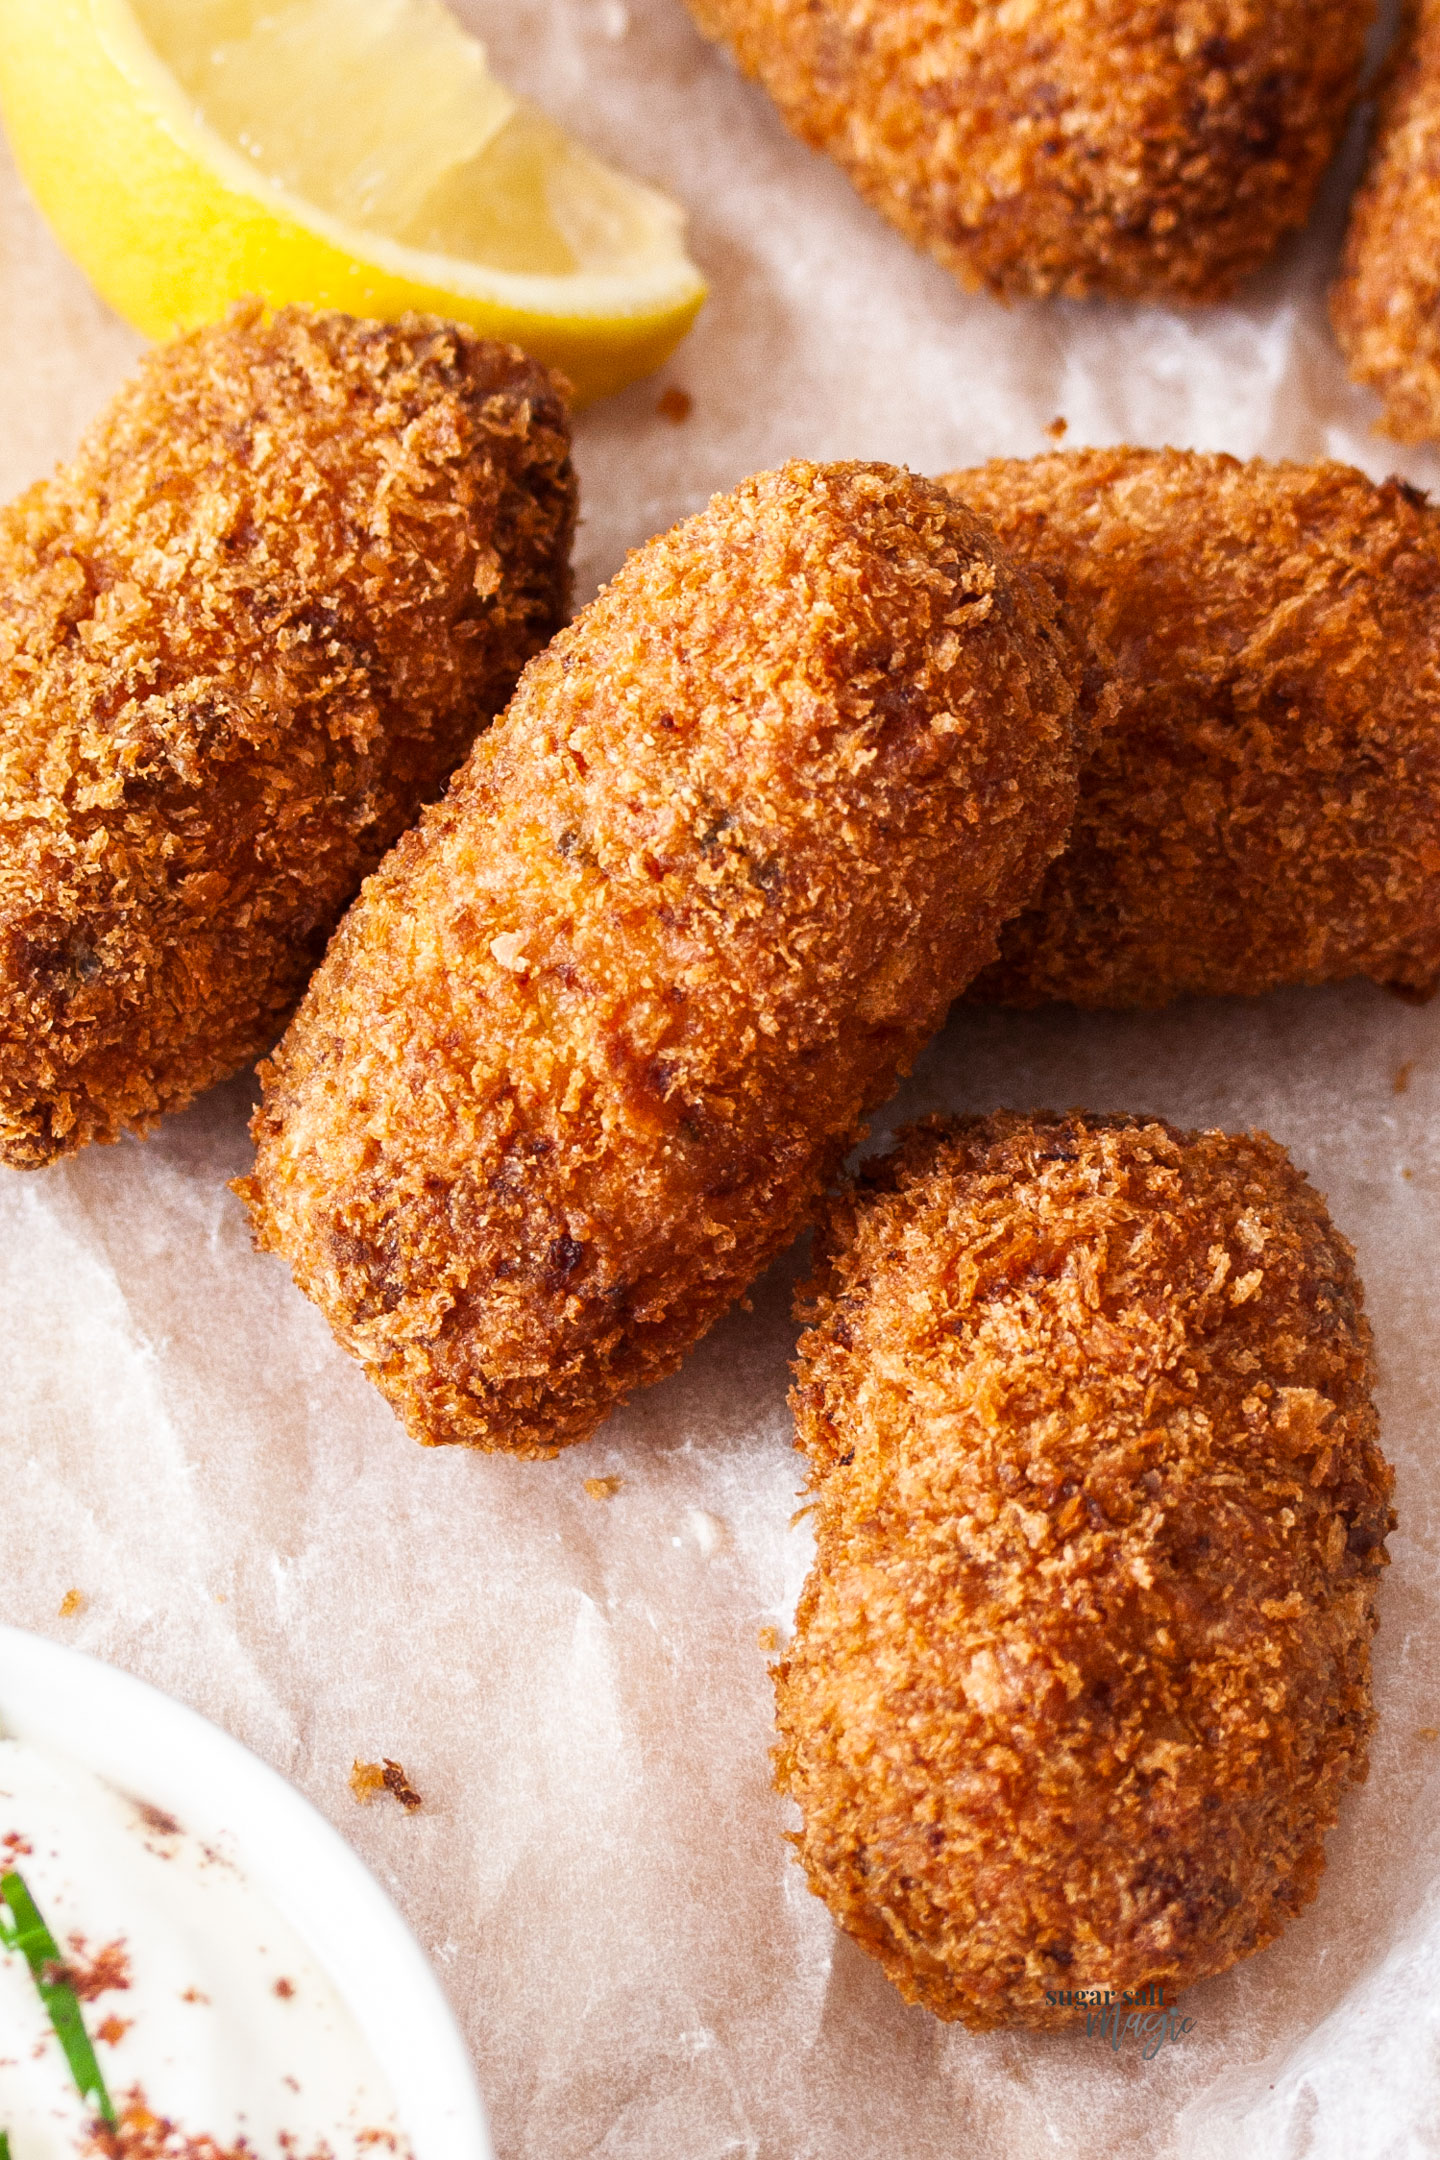 Closeup of the outside of the croquettes.